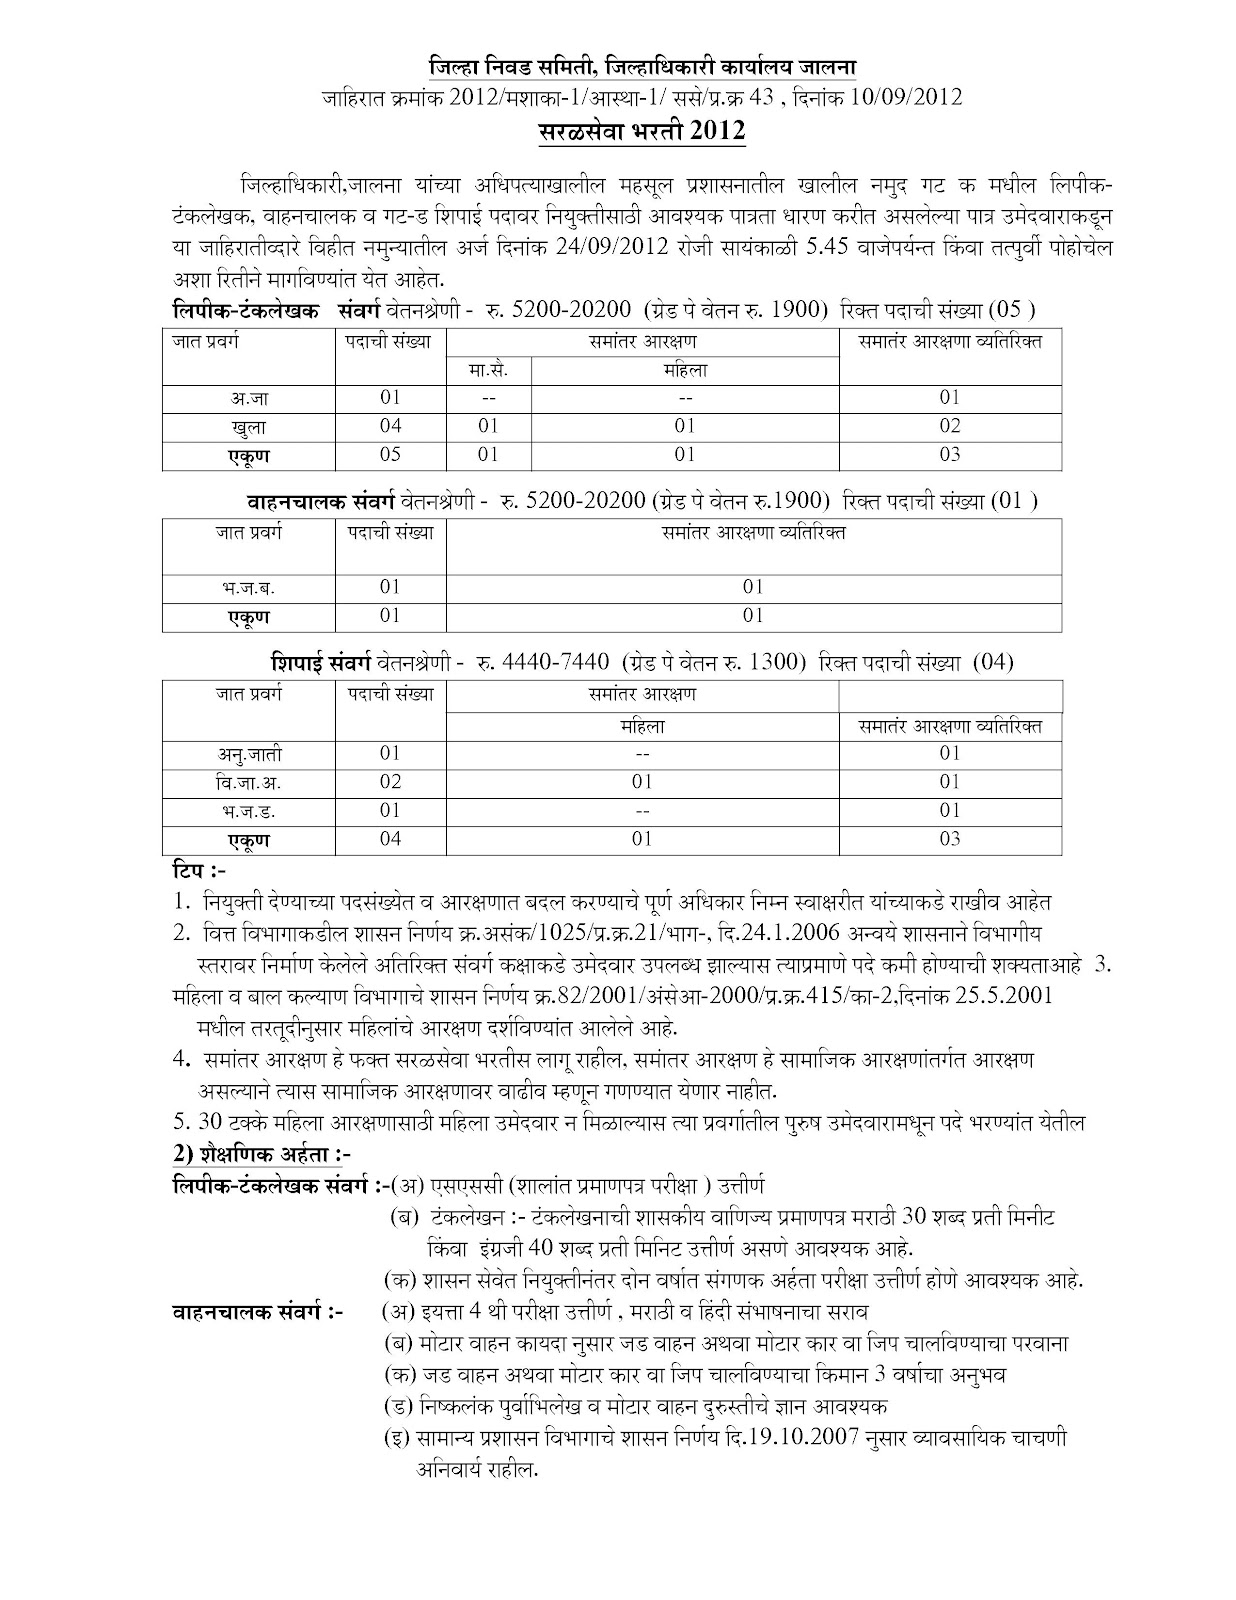 Collector Office Kolhapur Talathi Result 2011